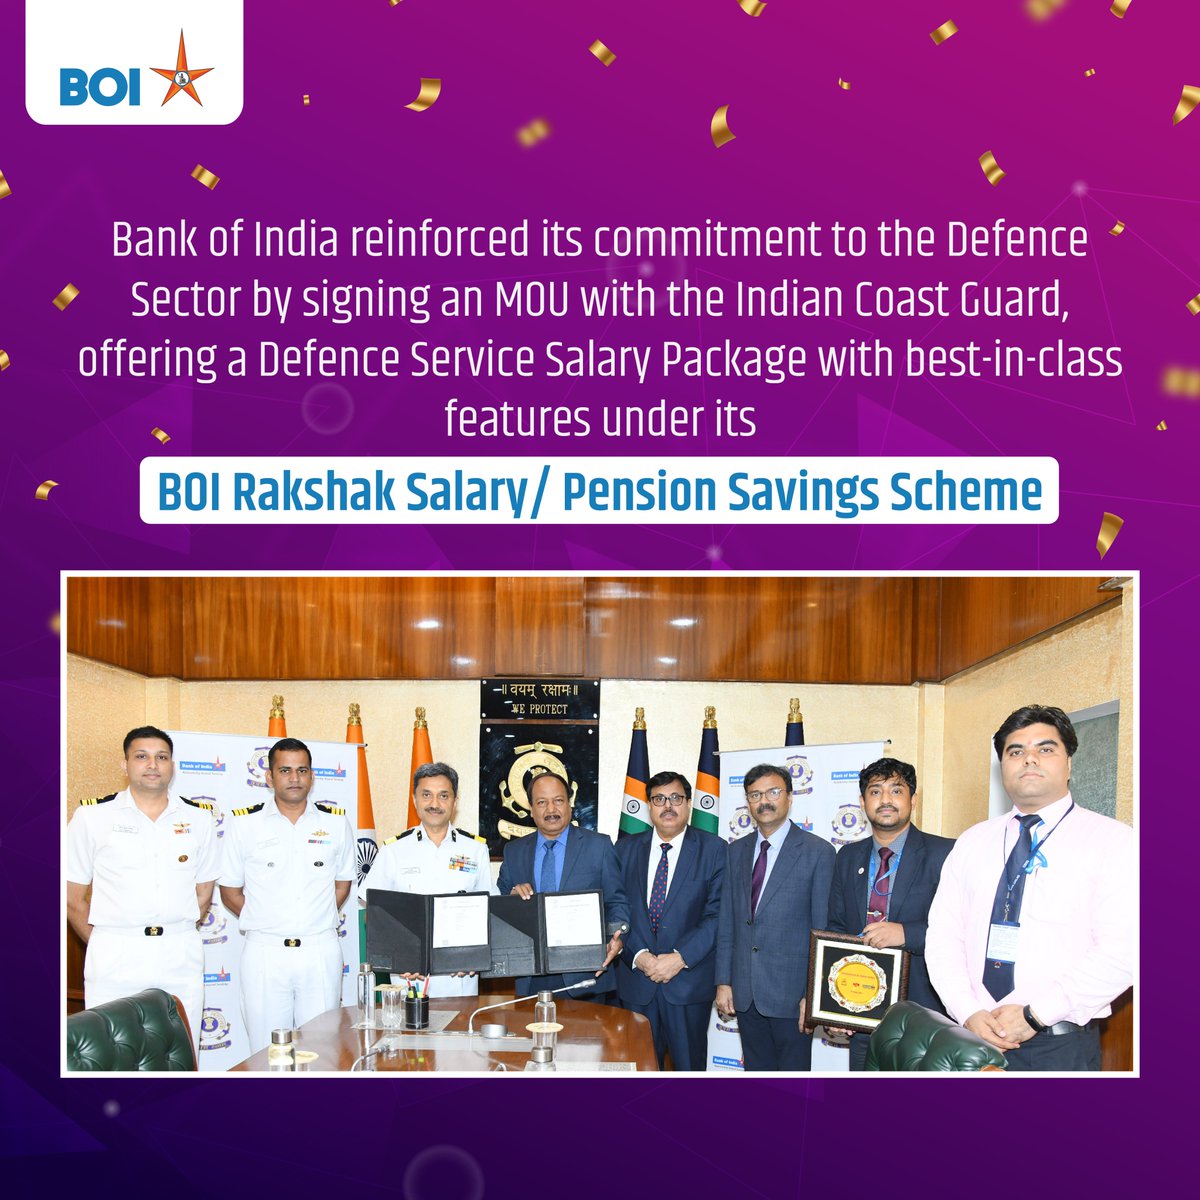 With BOI Rakshak's salary account, Bank of India proudly offers unparalleled support to all ranks of the Indian Coast Guard, veterans, recruits and Agniveers. Enjoy peace of mind with Personal Accidental Insurance of up to ₹150 Lakhs, Air Accidental Cover of up to ₹100 Lakhs,